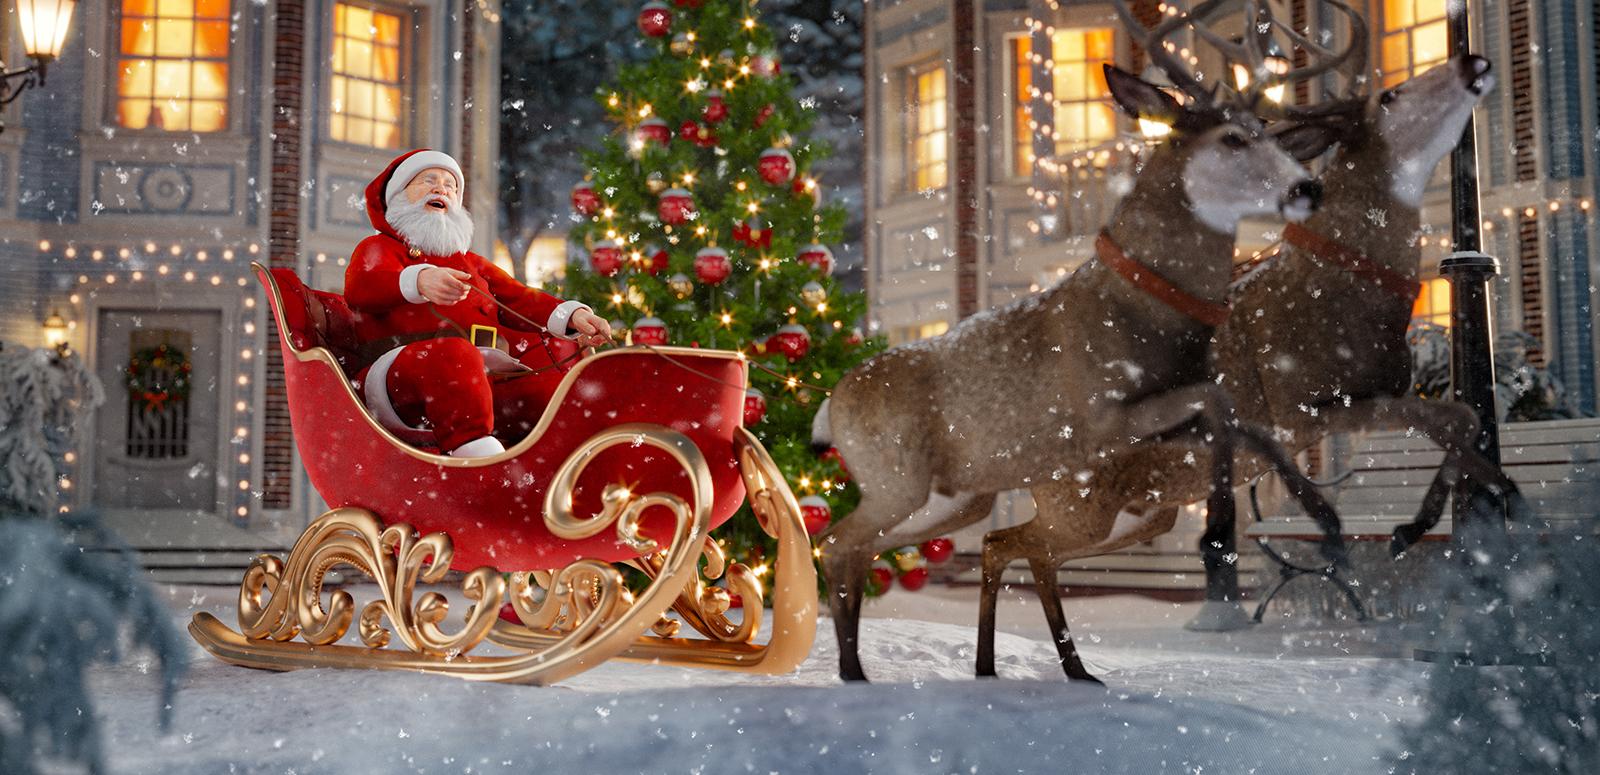 Santa Claus in a sleigh being pulled along by two reindeer in the snow.